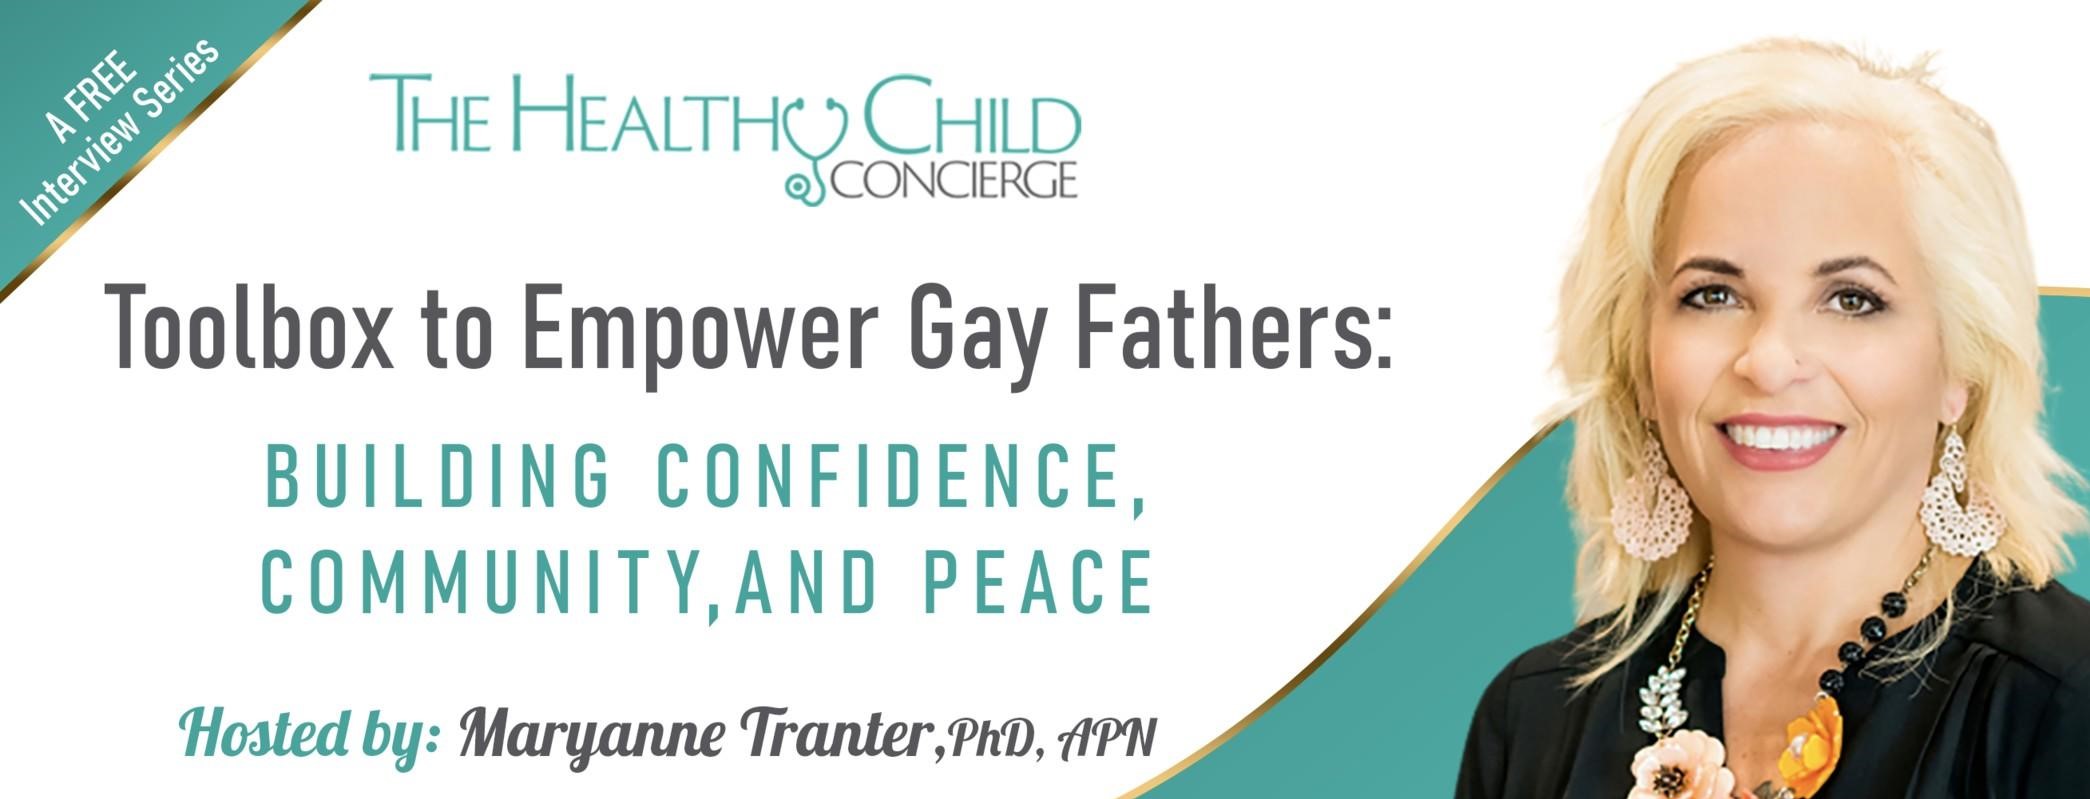 THE TOOLBOX TO EMPOWER GAY FATHERS HOSTED BY MARYANNE TRANTER